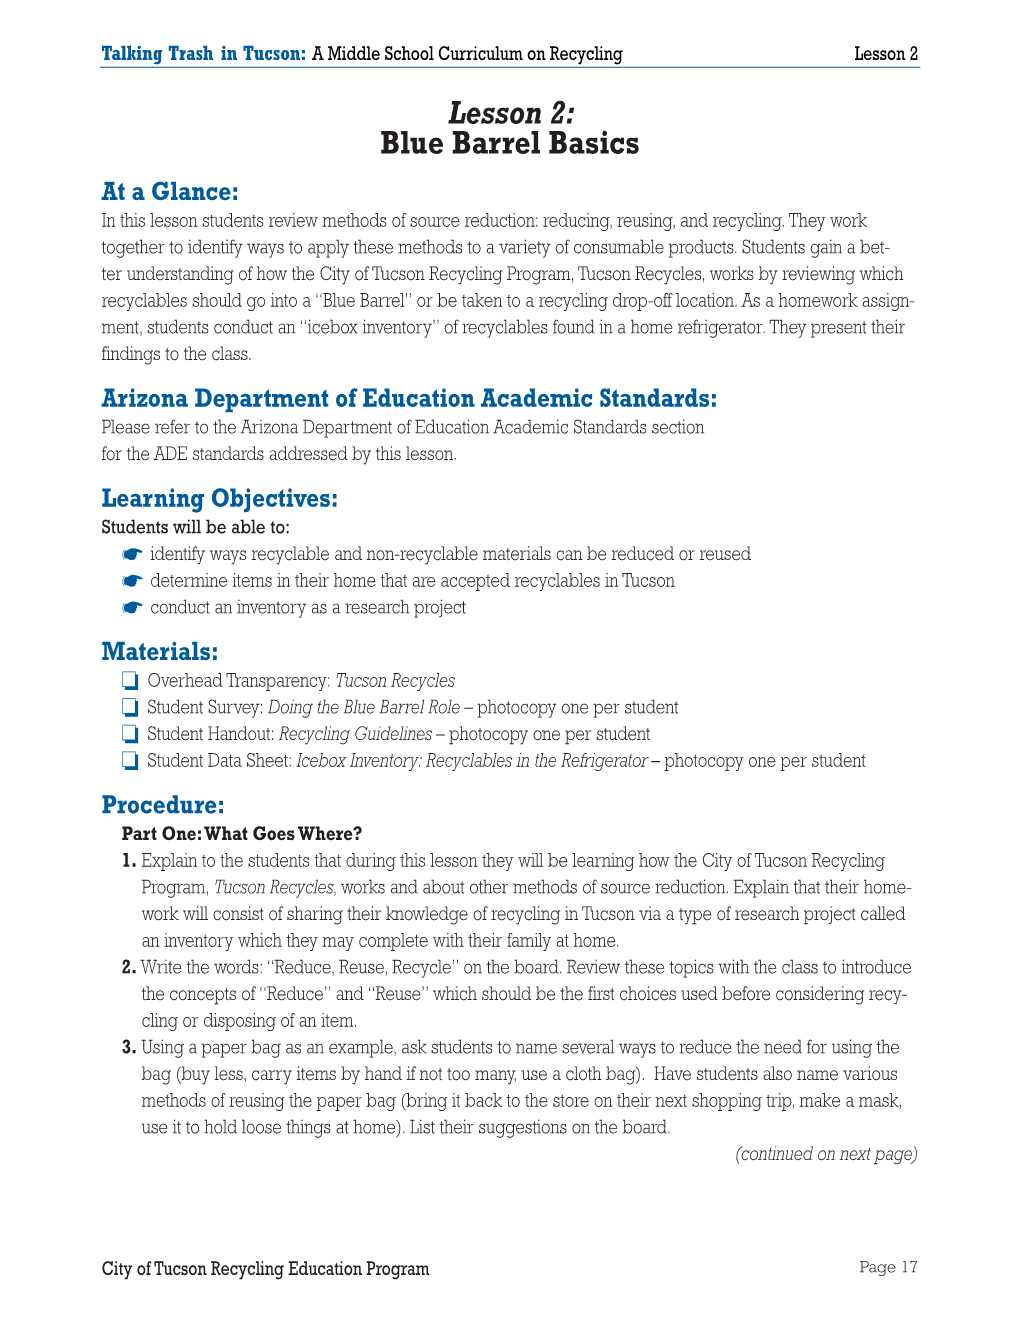 Blue Barrel Basics at a Glance: in This Lesson Students Review Methods of Source Reduction: Reducing, Reusing, and Recycling